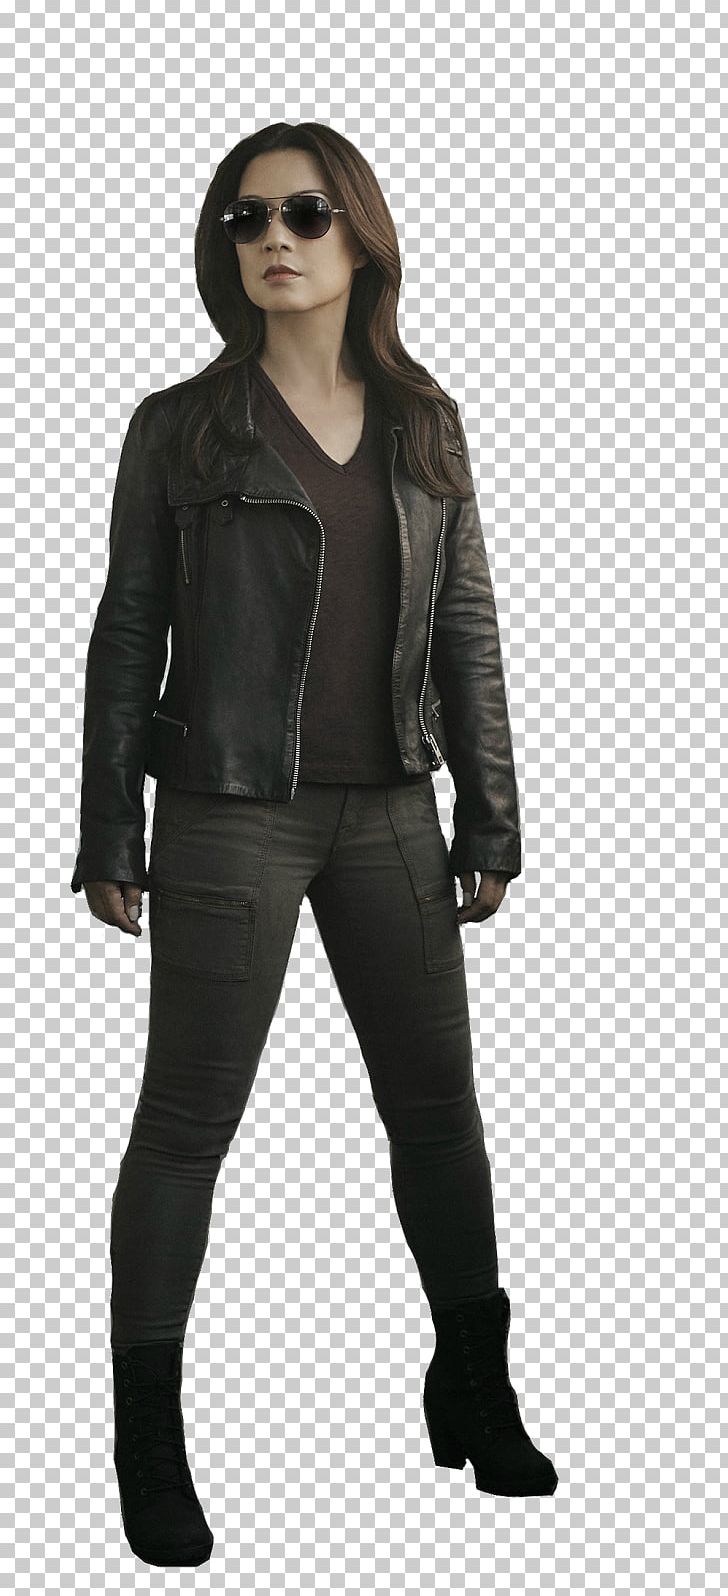 Chloe Bennet Daisy Johnson Yo-Yo Rodriguez Agents Of S.H.I.E.L.D. Phil Coulson PNG, Clipart, Agents Of Shield, Black, Black M, Chloe Bennet, Daisy Free PNG Download